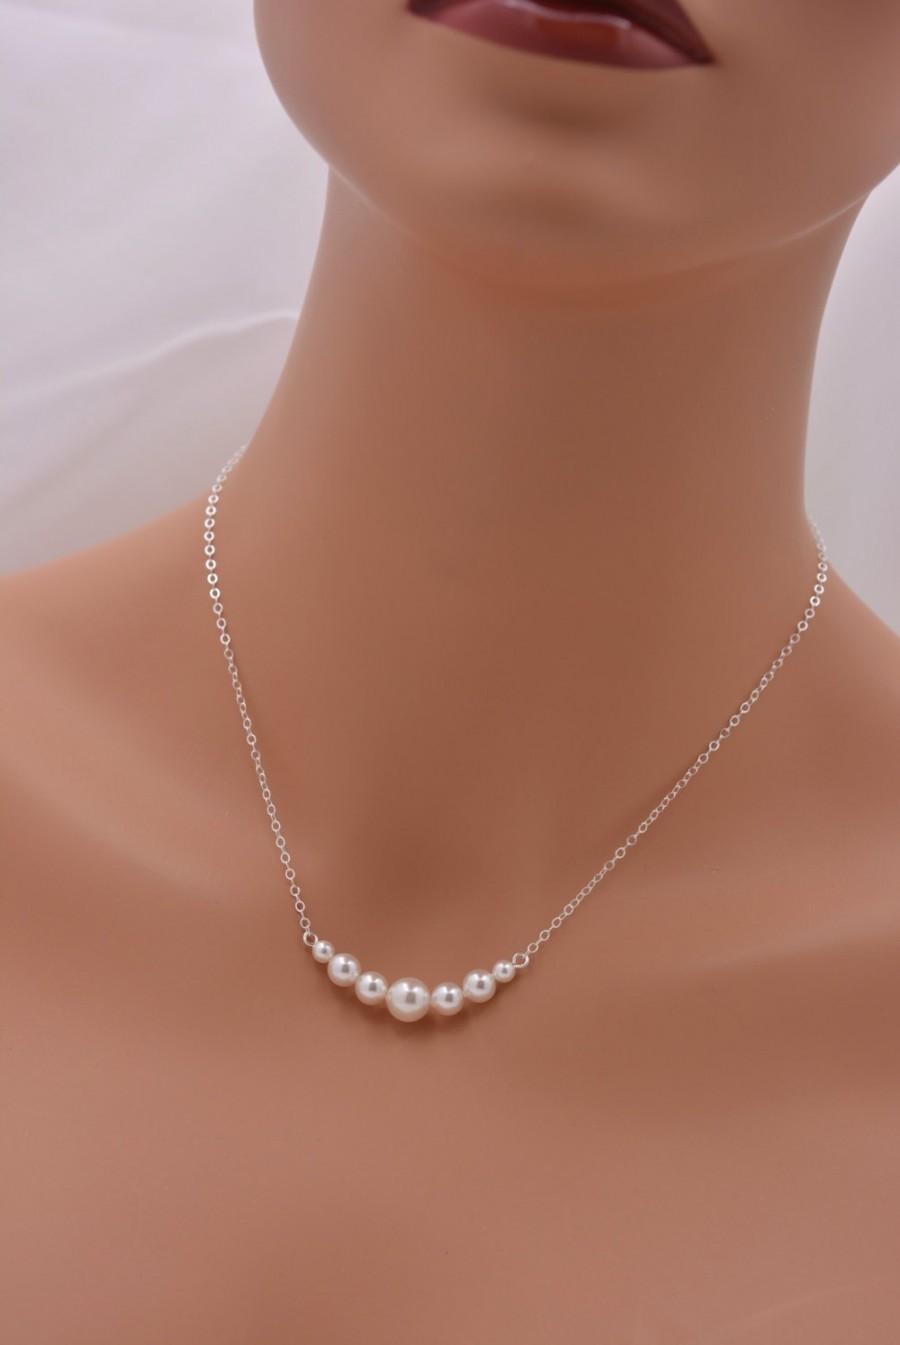 Mariage - Set of 6 Pearl Necklaces, 6 Bridesmaid Pearl Necklaces, 925 Sterling Silver Necklaces, Pearl Bar Necklace, Floating Pearls 0305